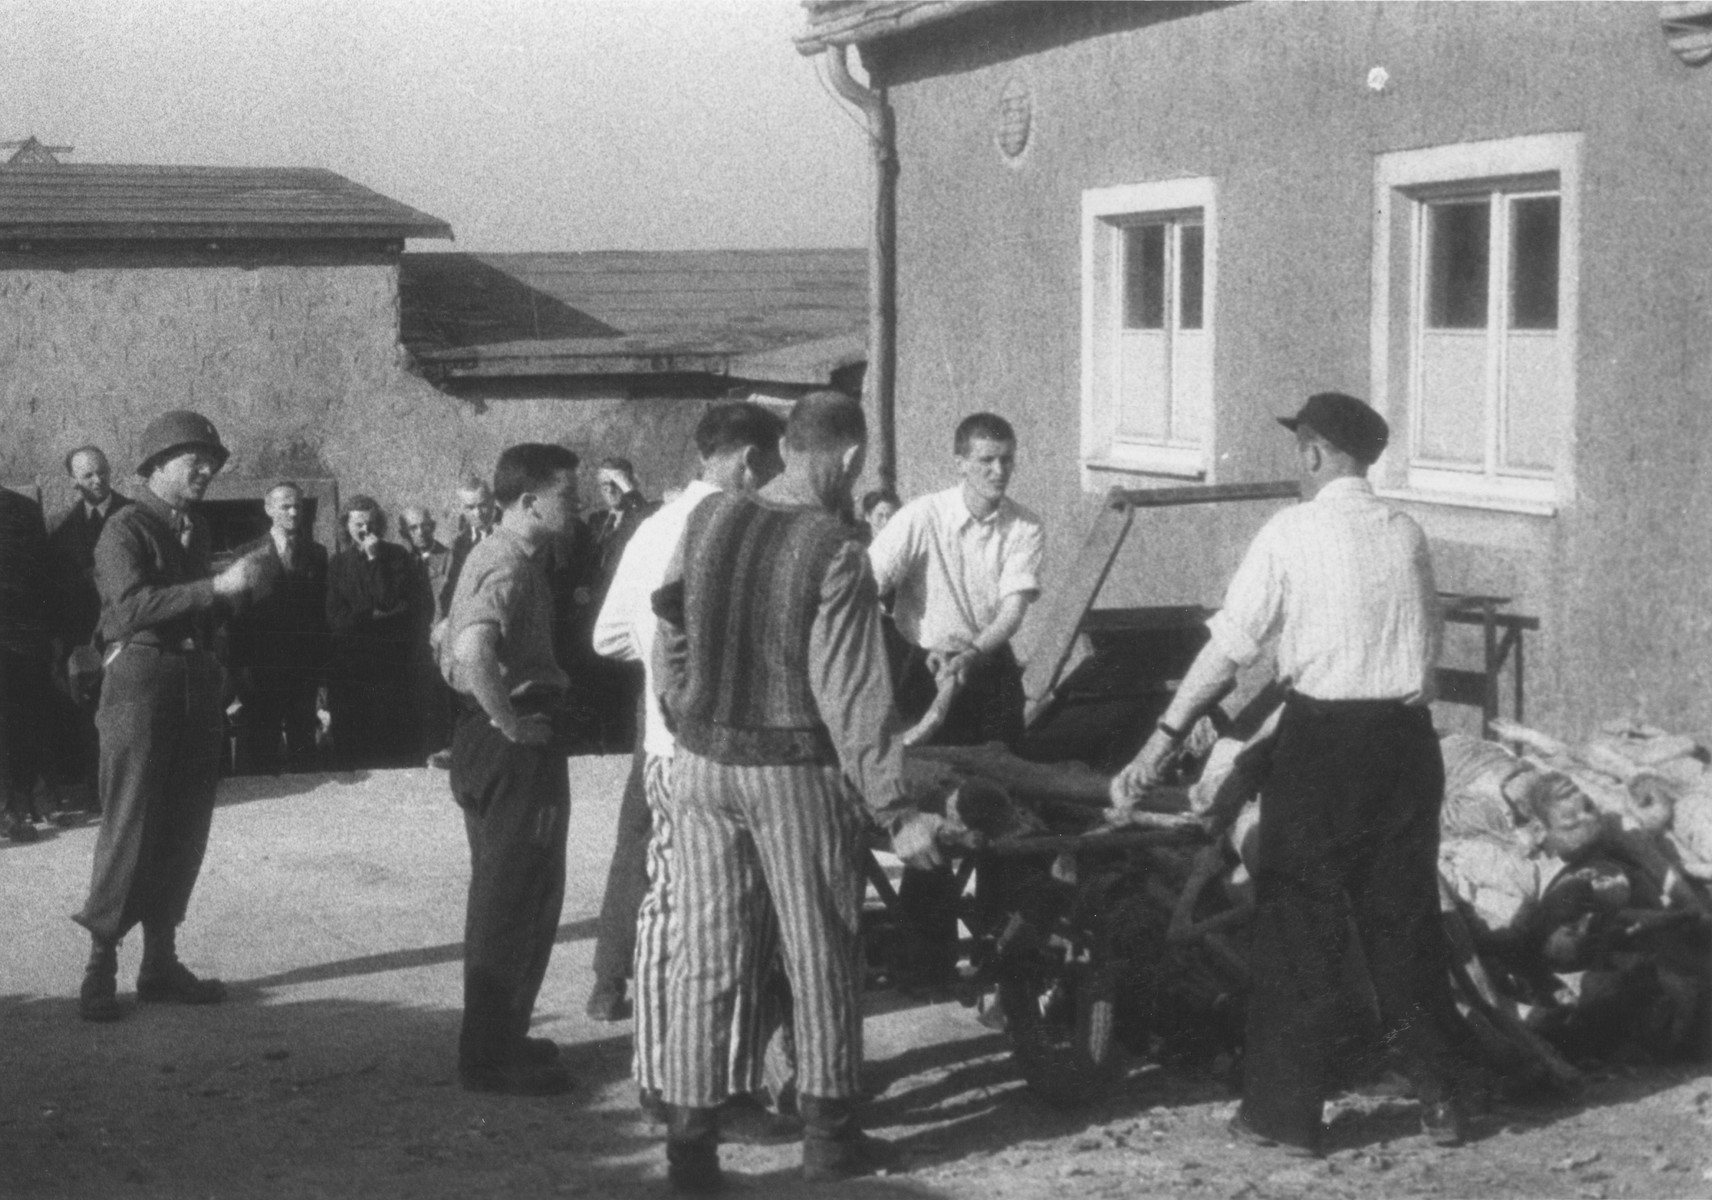 Survivors stack corpses outside the crematorium in the newly liberated Buchenwald concentration camp while German civilians look on.